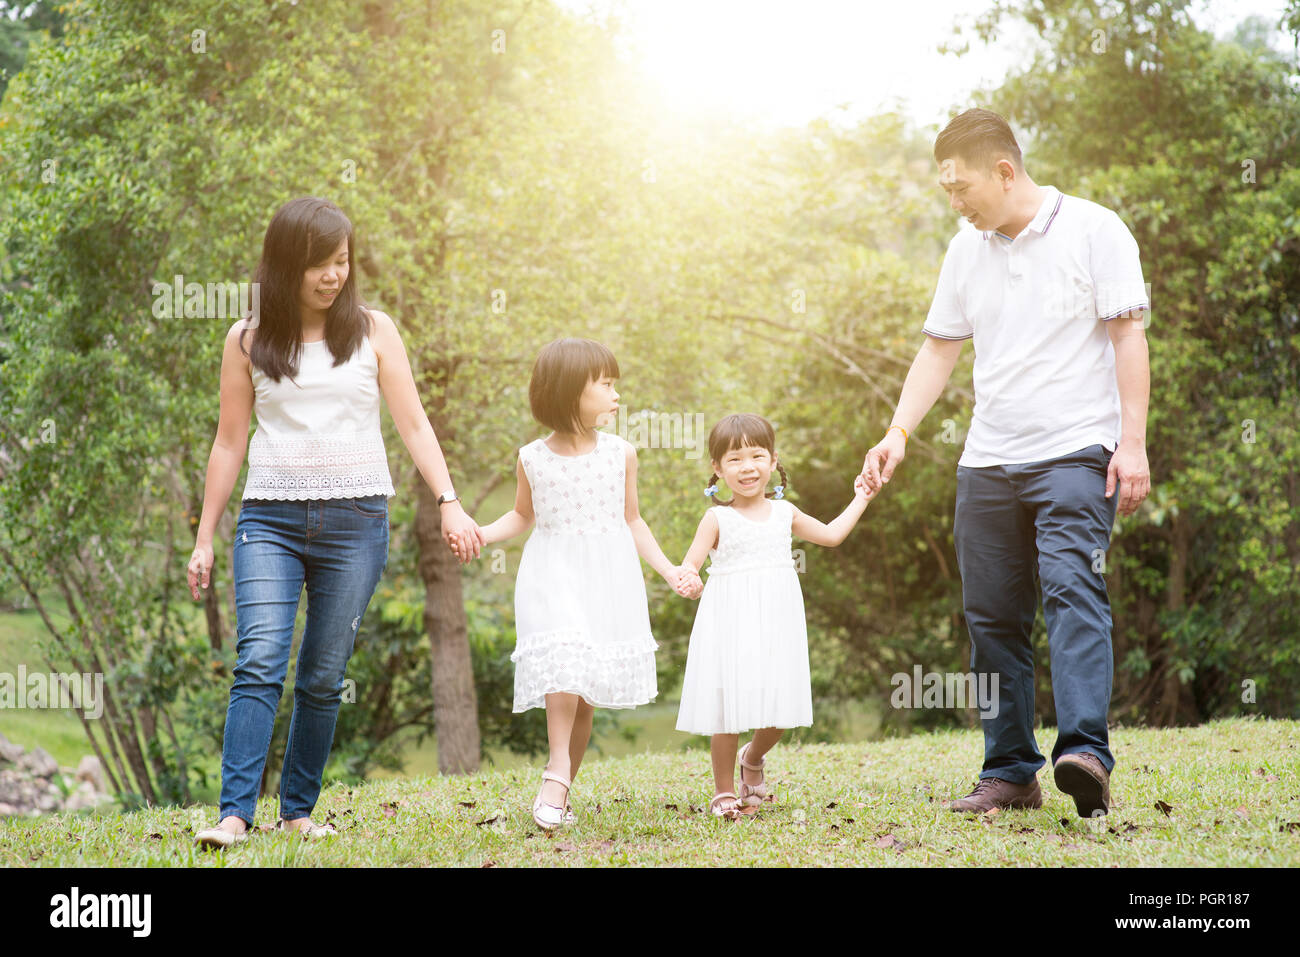 Asian Family Outdoors Parents And Children Holding Hands And Walking At Green Park Stock Photo Alamy